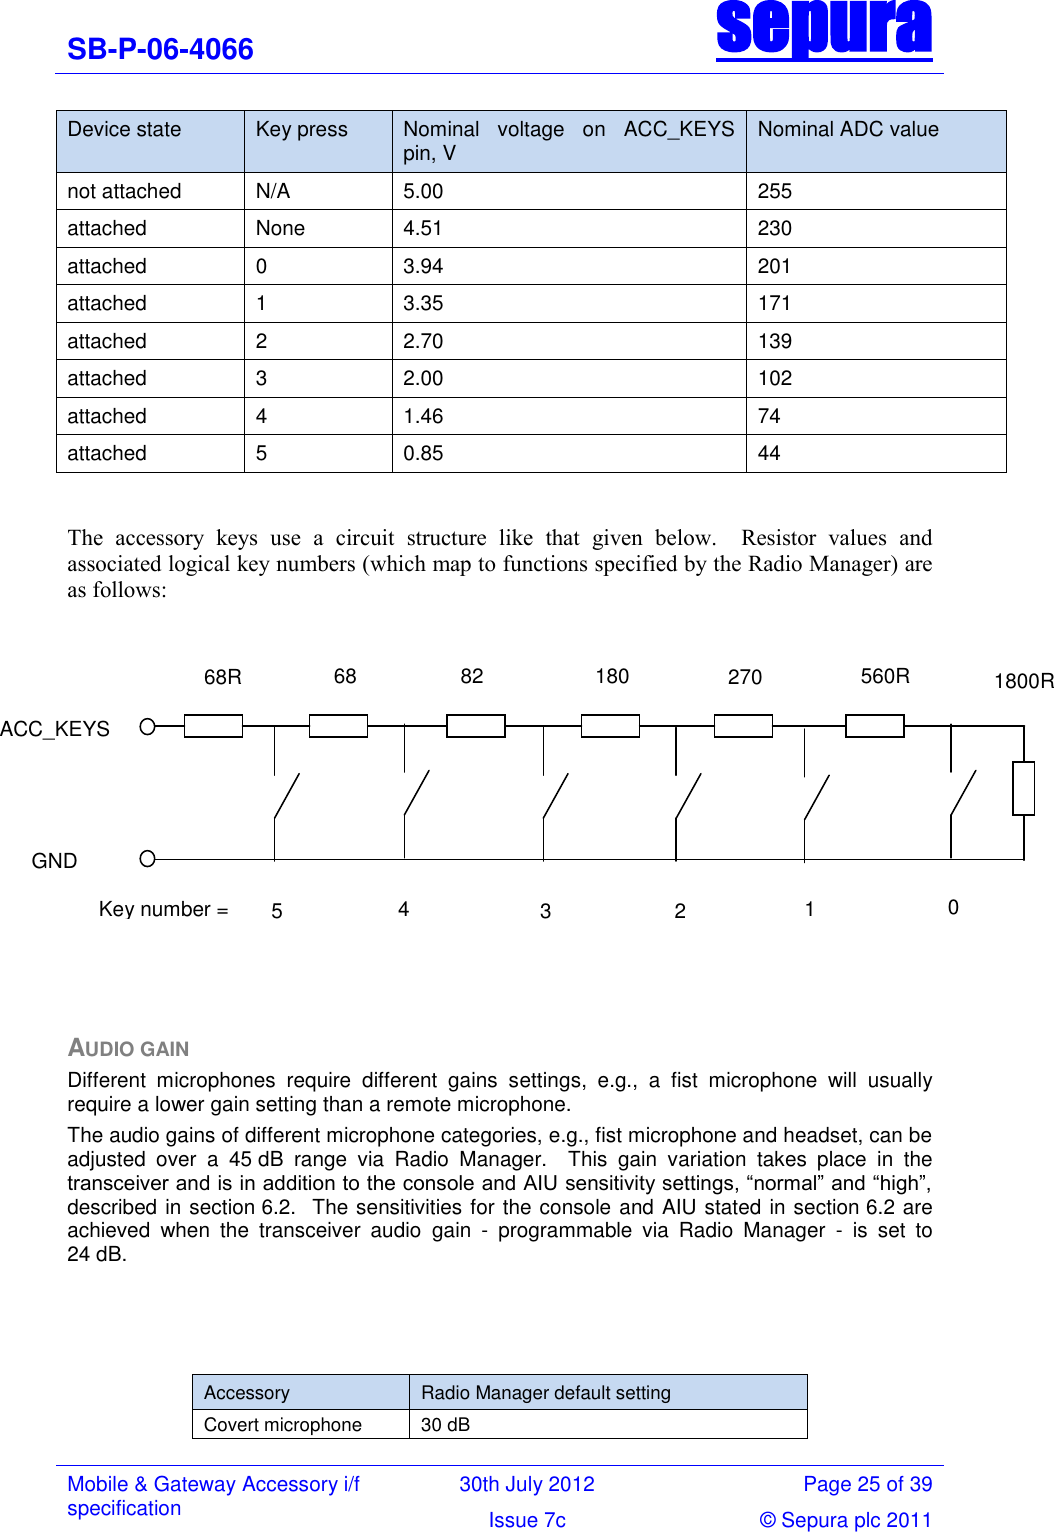 SB-P-06-4066 sepura  Mobile &amp; Gateway Accessory i/f specification 30th July 2012 Page 25 of 39 Issue 7c © Sepura plc 2011   Device state Key press Nominal  voltage  on  ACC_KEYS pin, V Nominal ADC value not attached N/A 5.00 255 attached None 4.51 230 attached 0 3.94 201 attached 1 3.35 171 attached 2 2.70 139 attached 3 2.00 102 attached 4 1.46 74 attached 5 0.85 44  The  accessory  keys  use  a  circuit  structure  like  that  given  below.    Resistor  values  and associated logical key numbers (which map to functions specified by the Radio Manager) are as follows:           AUDIO GAIN Different  microphones  require  different  gains  settings,  e.g.,  a  fist  microphone  will  usually require a lower gain setting than a remote microphone.   The audio gains of different microphone categories, e.g., fist microphone and headset, can be adjusted  over  a  45 dB  range  via  Radio  Manager.    This  gain  variation  takes  place  in  the transceiver and is in addition to the console and AIU sensitivity settings, ―normal‖ and ―high‖, described in section 6.2.  The sensitivities for the console and AIU stated in section 6.2 are achieved  when  the  transceiver  audio  gain  -  programmable  via  Radio  Manager  -  is  set  to 24 dB.  Accessory Radio Manager default setting Covert microphone 30 dB 68R 68RRR 82R 180R 270R 560R 5 3 4 2 1 0 ACC_KEYS GND Key number = 1800R 